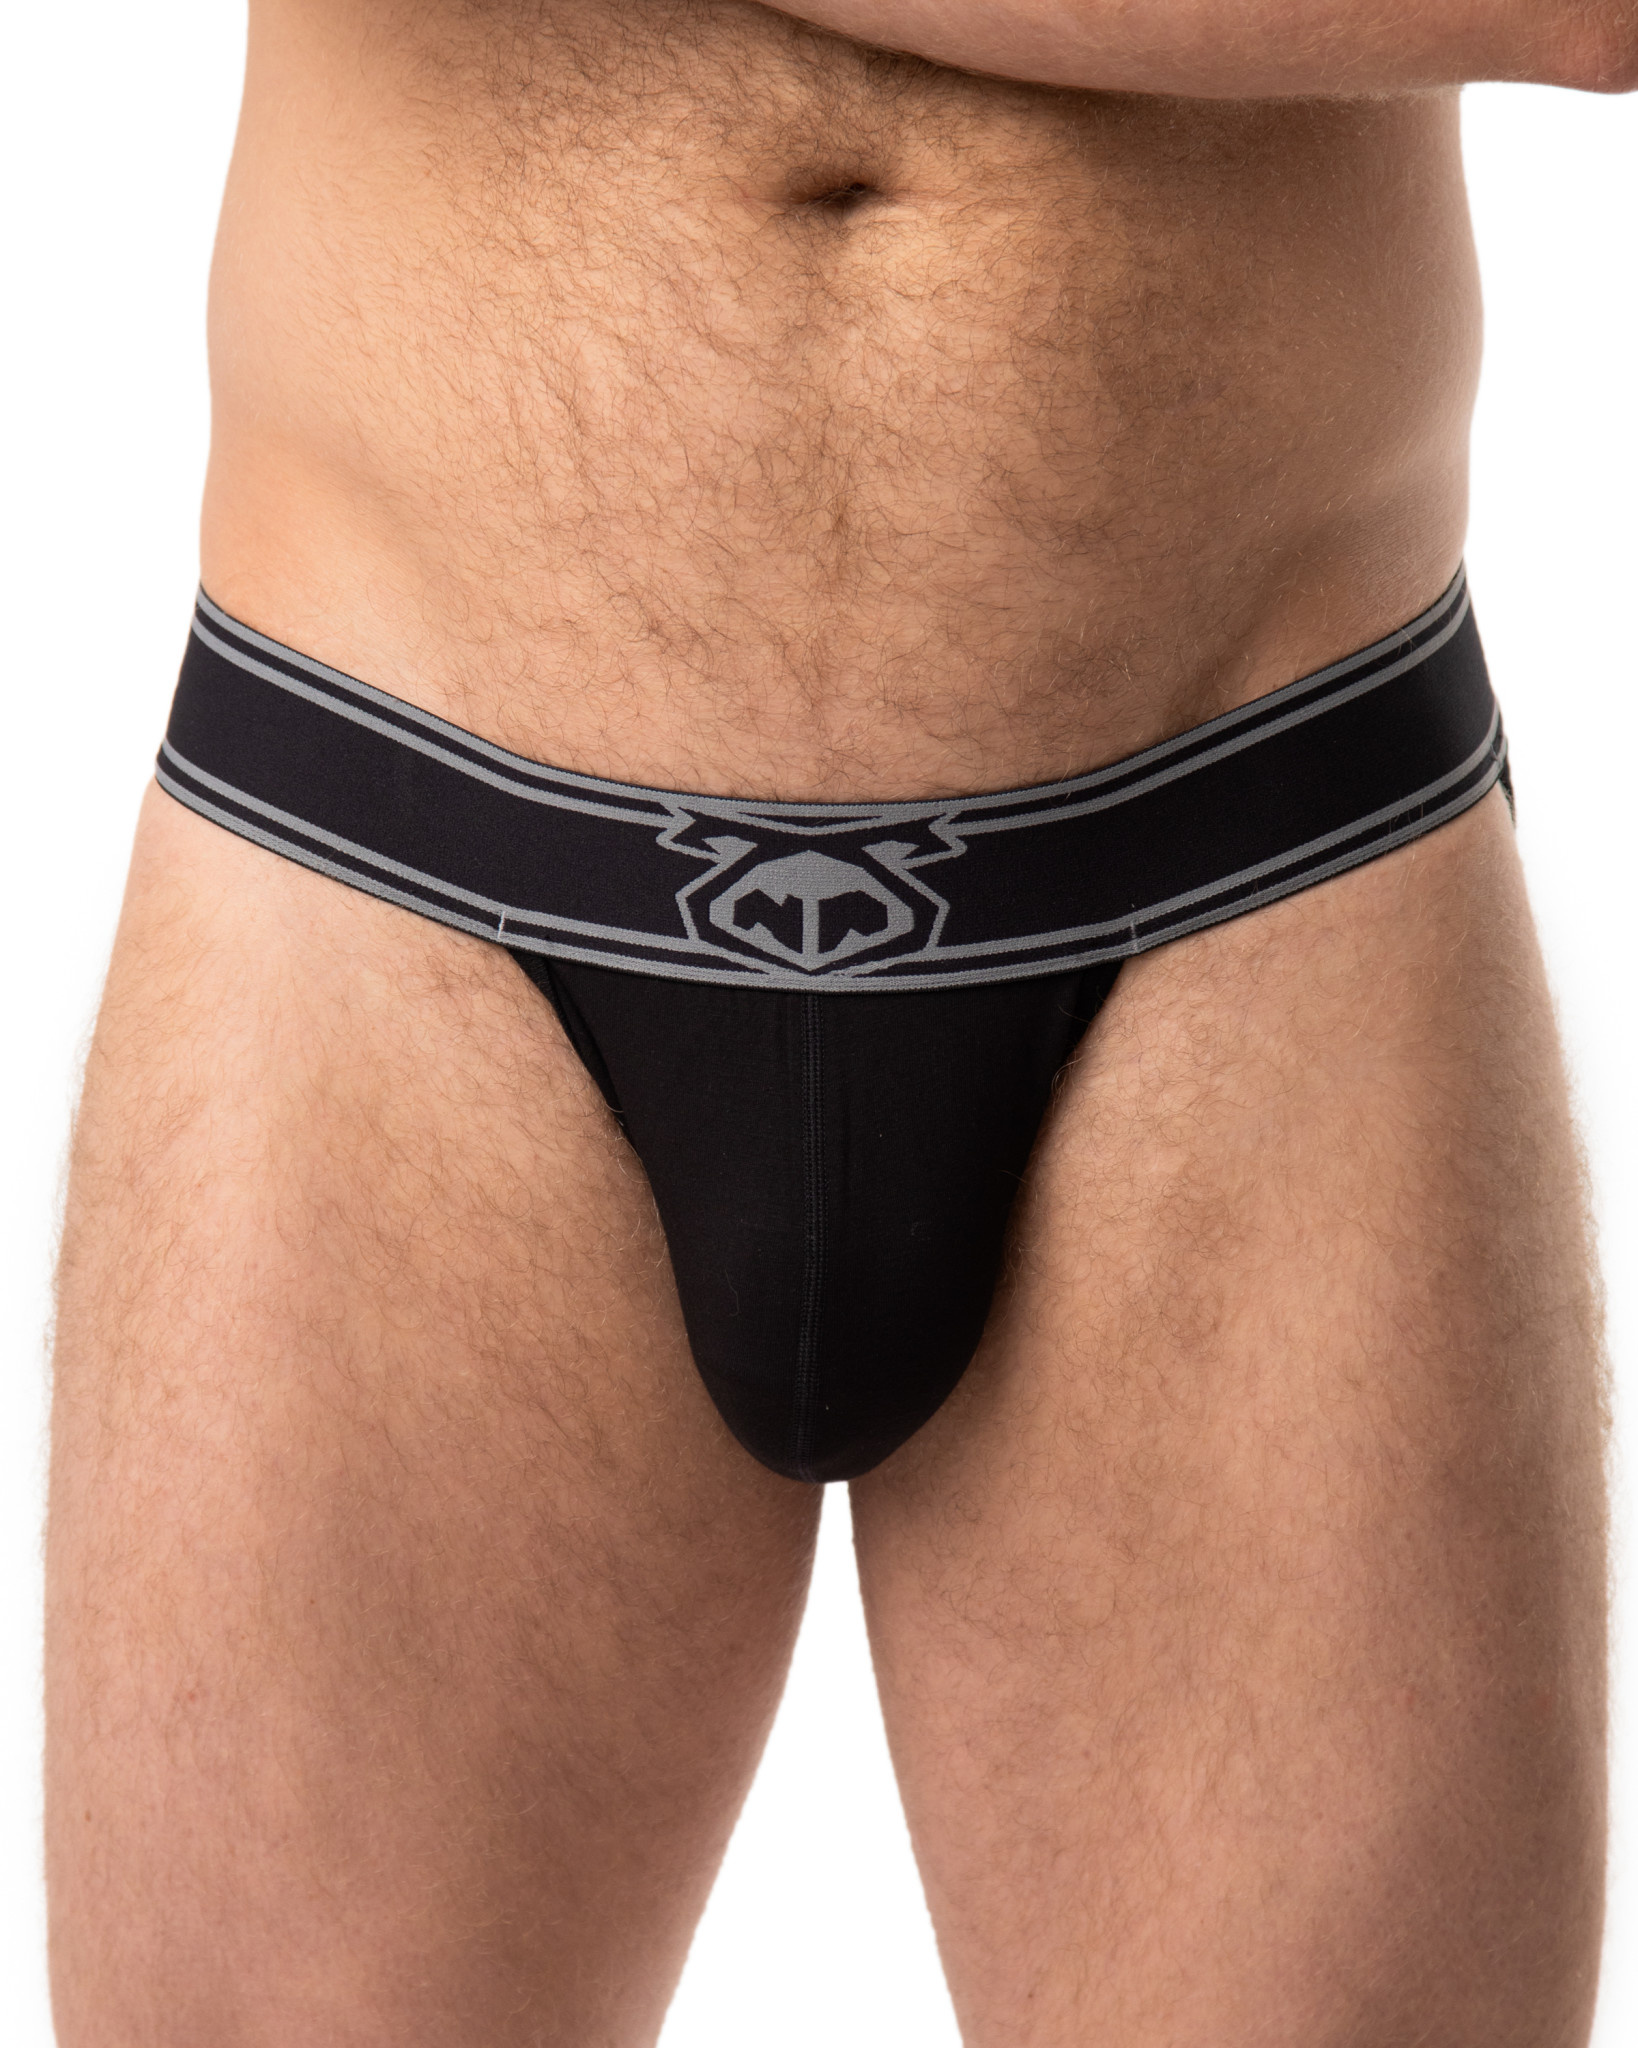 Nasty Pig Core Sport Brief - Black/Grey - Doghouse Leathers